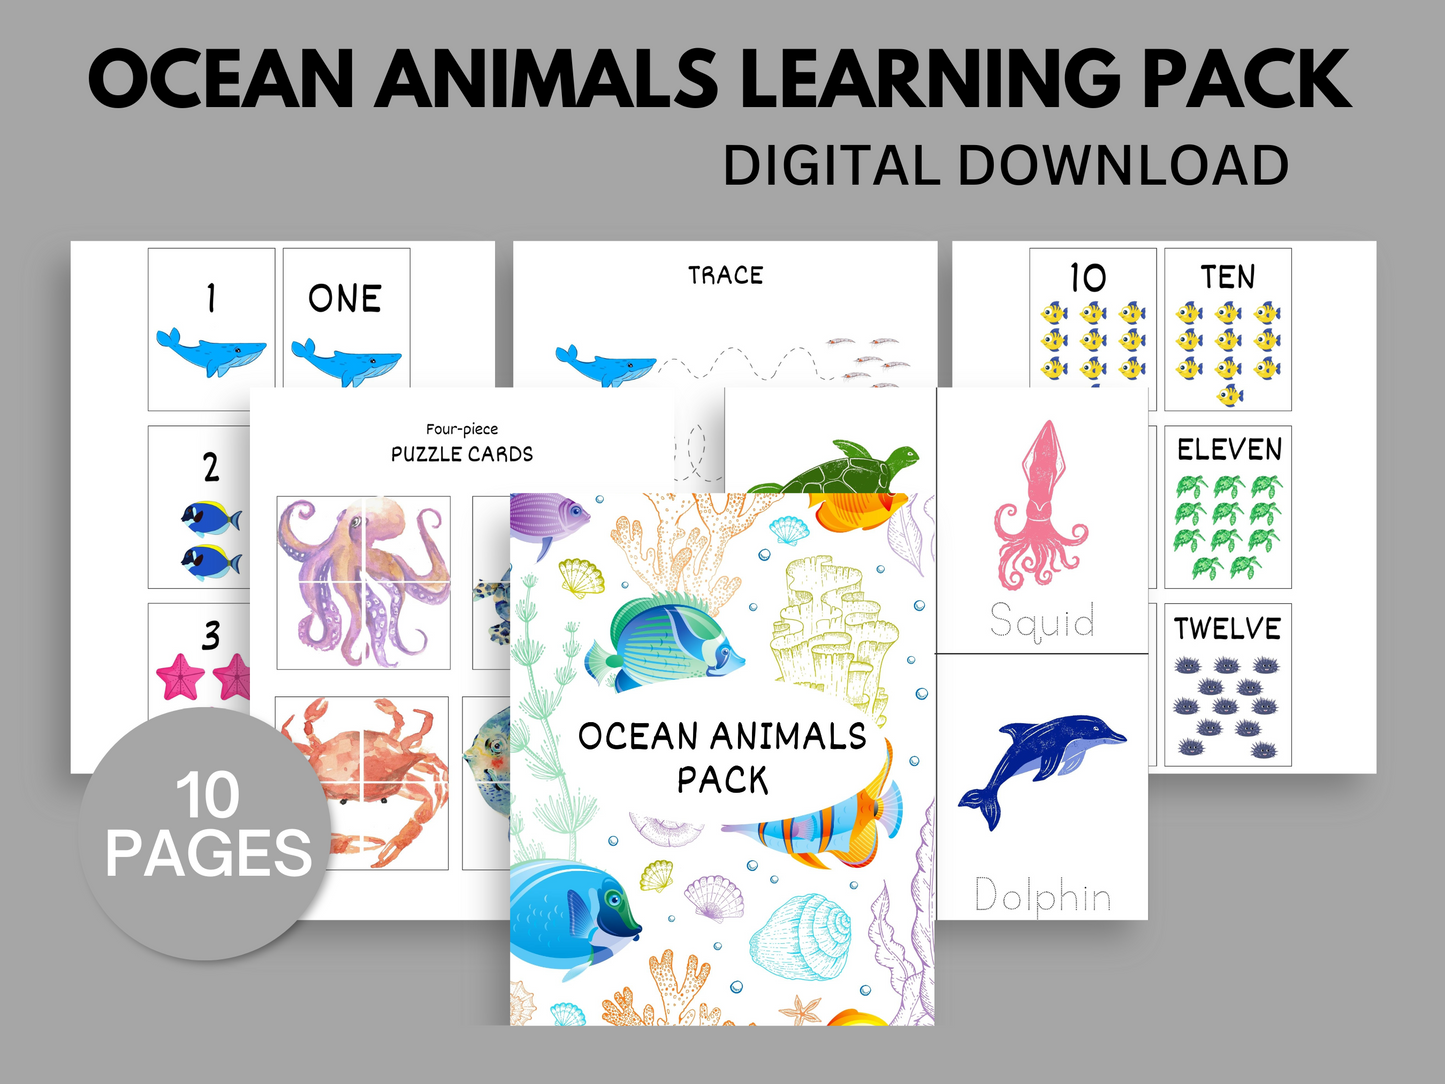 Ocean animals learning pack digital download showing 6 out of 10 pages.